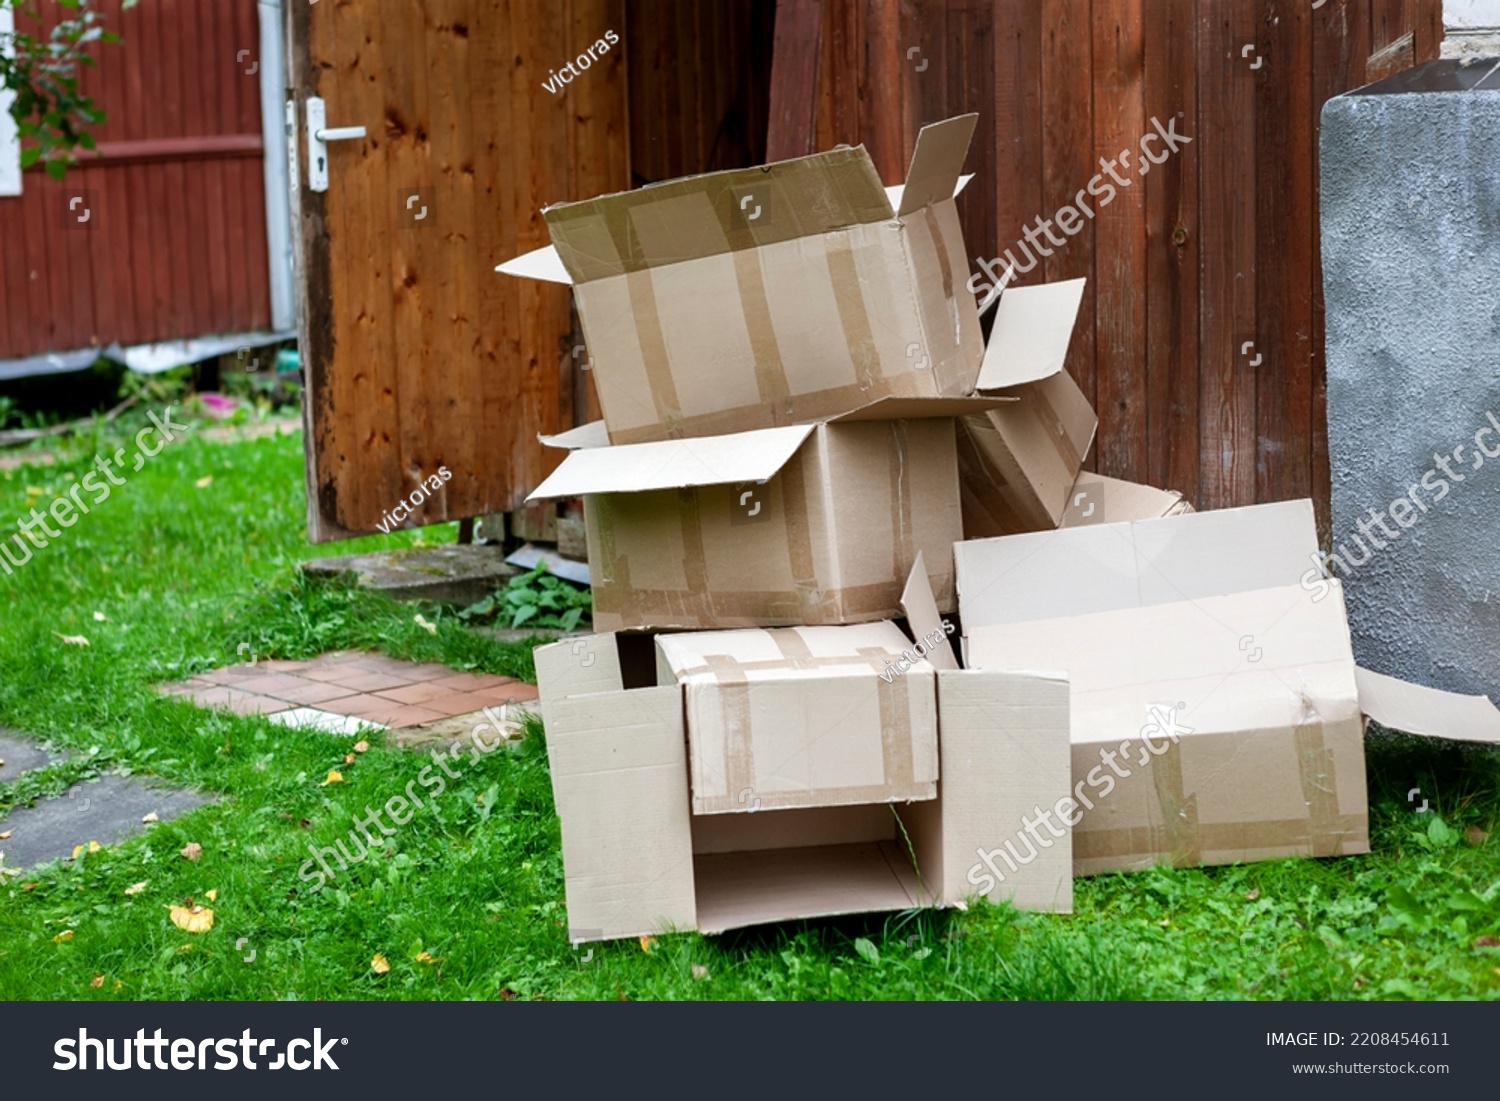 a pile of discarded empty cardboard boxes outside a house, outdoor shot #2208454611